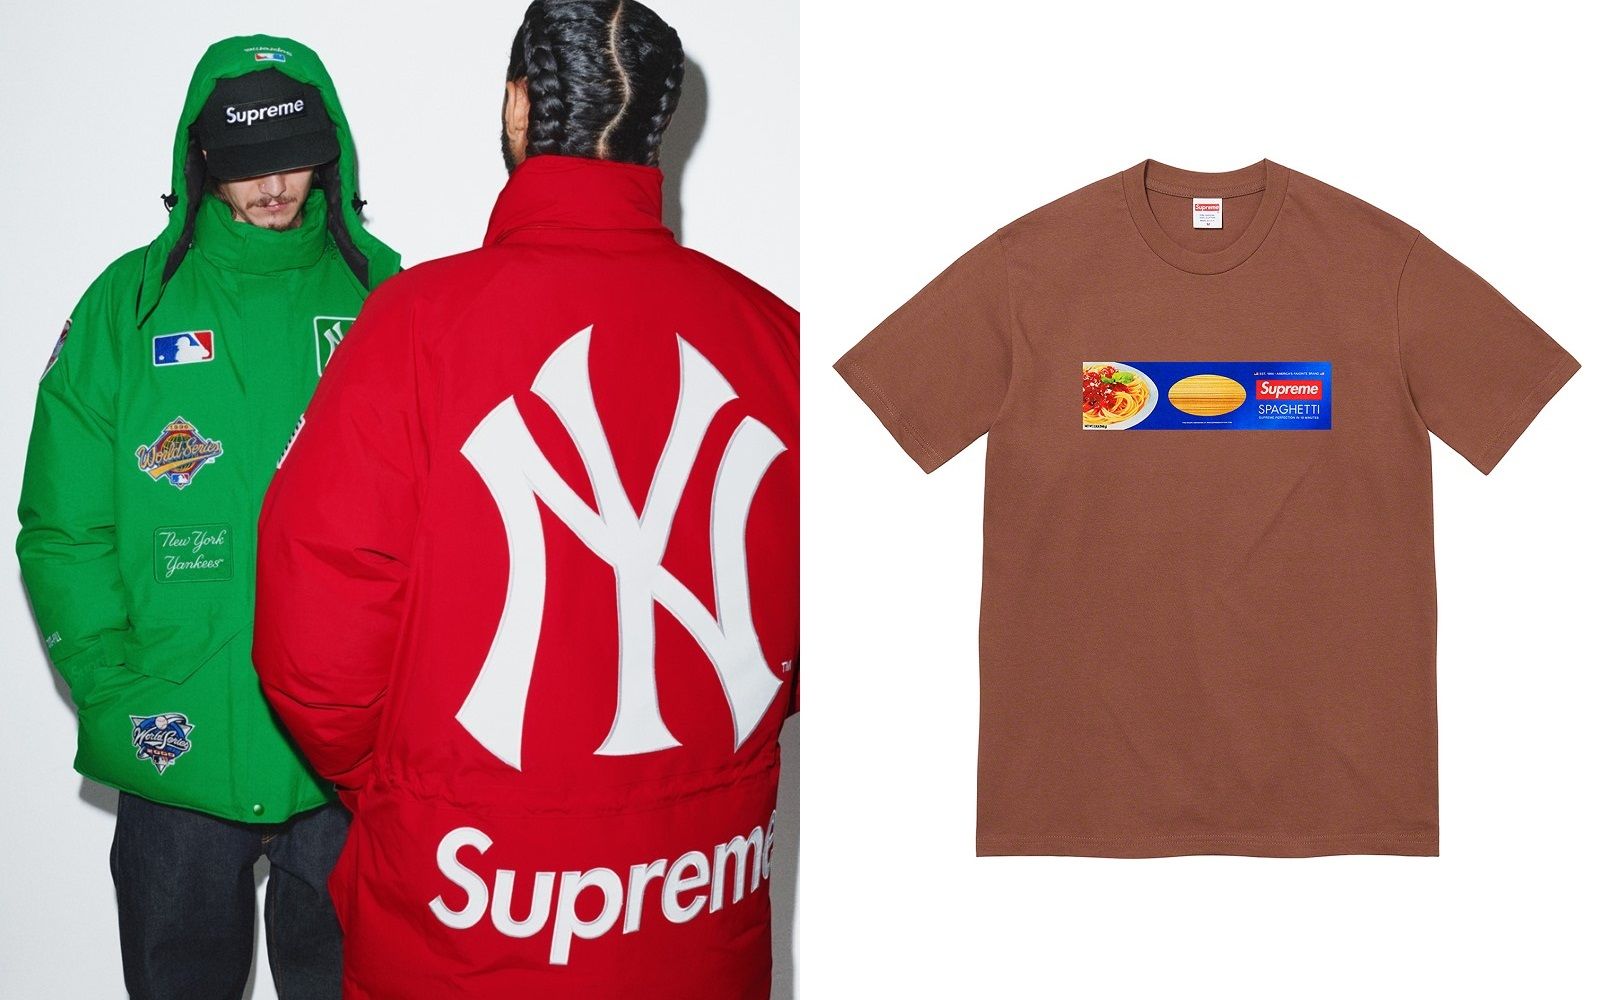 5 things to know about Supreme's FW21 collection